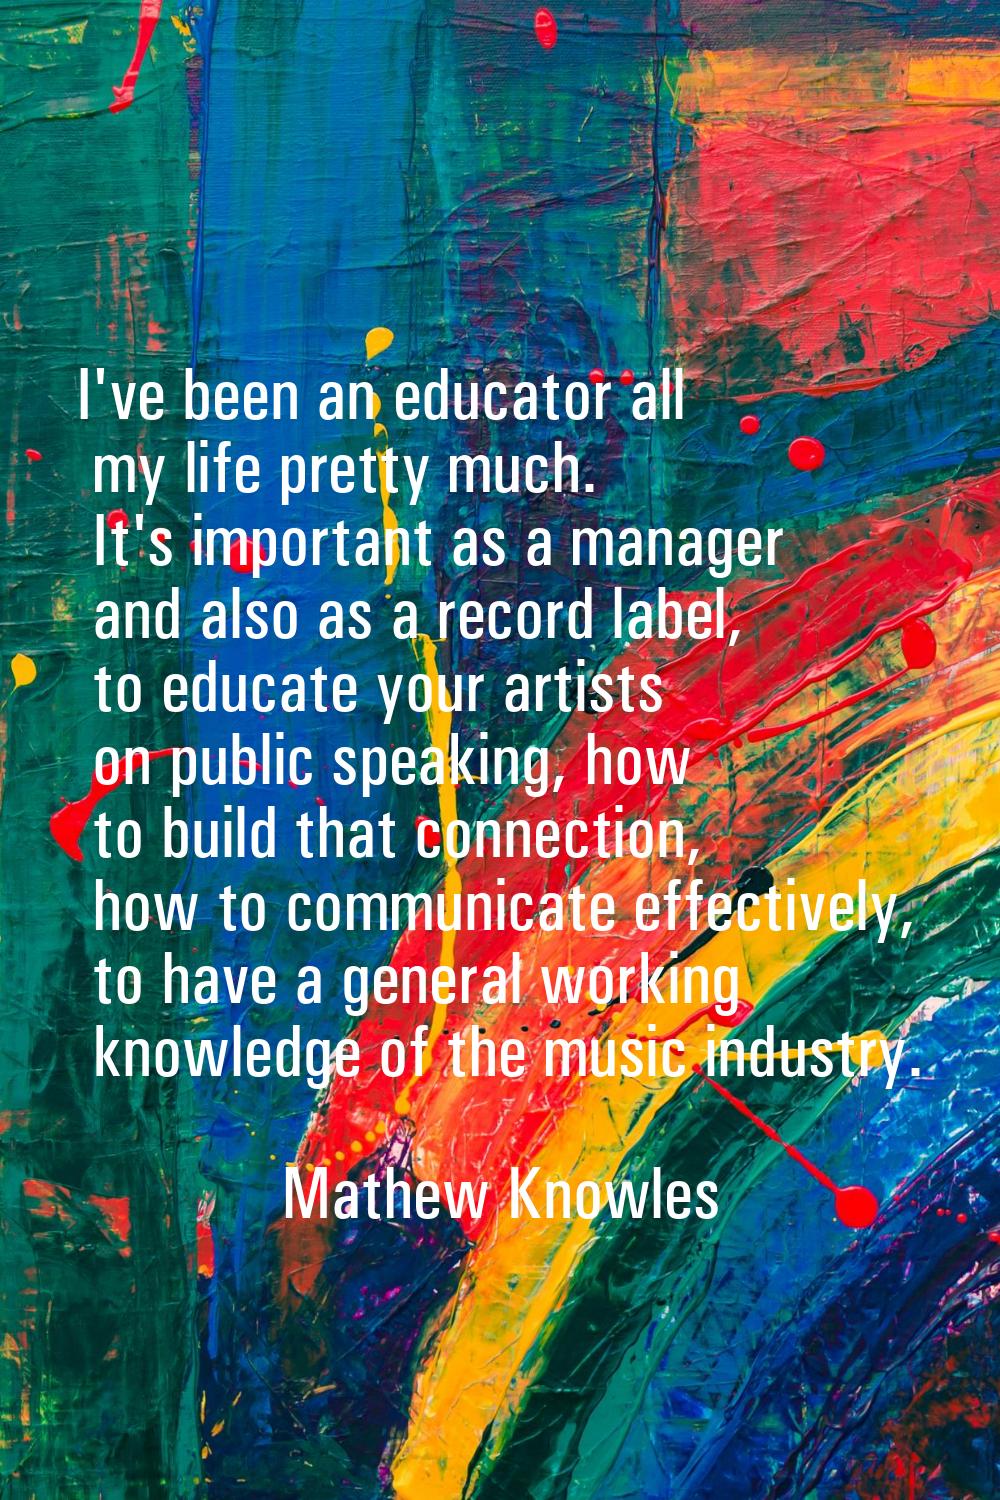 I've been an educator all my life pretty much. It's important as a manager and also as a record lab